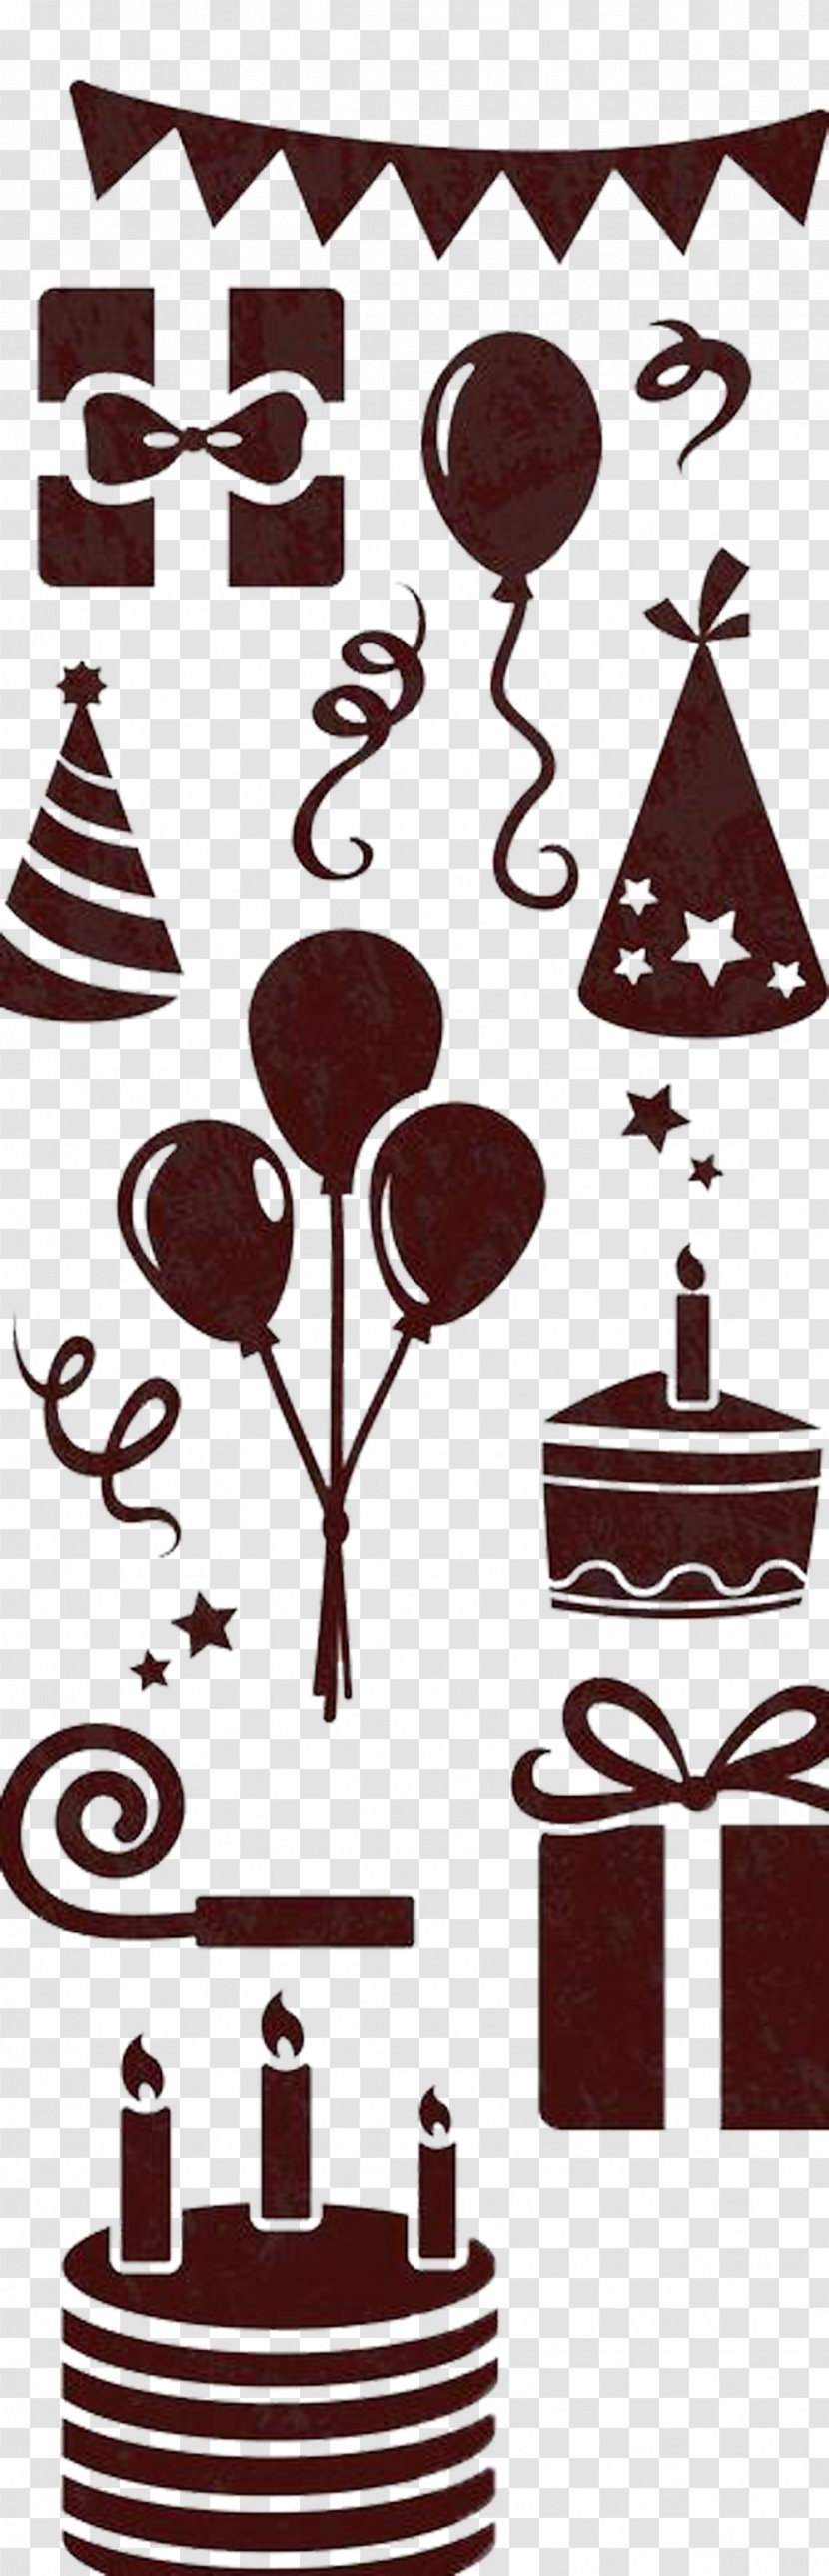 Birthday Cake Icon - Chocolate Decoration Picture Material Transparent PNG